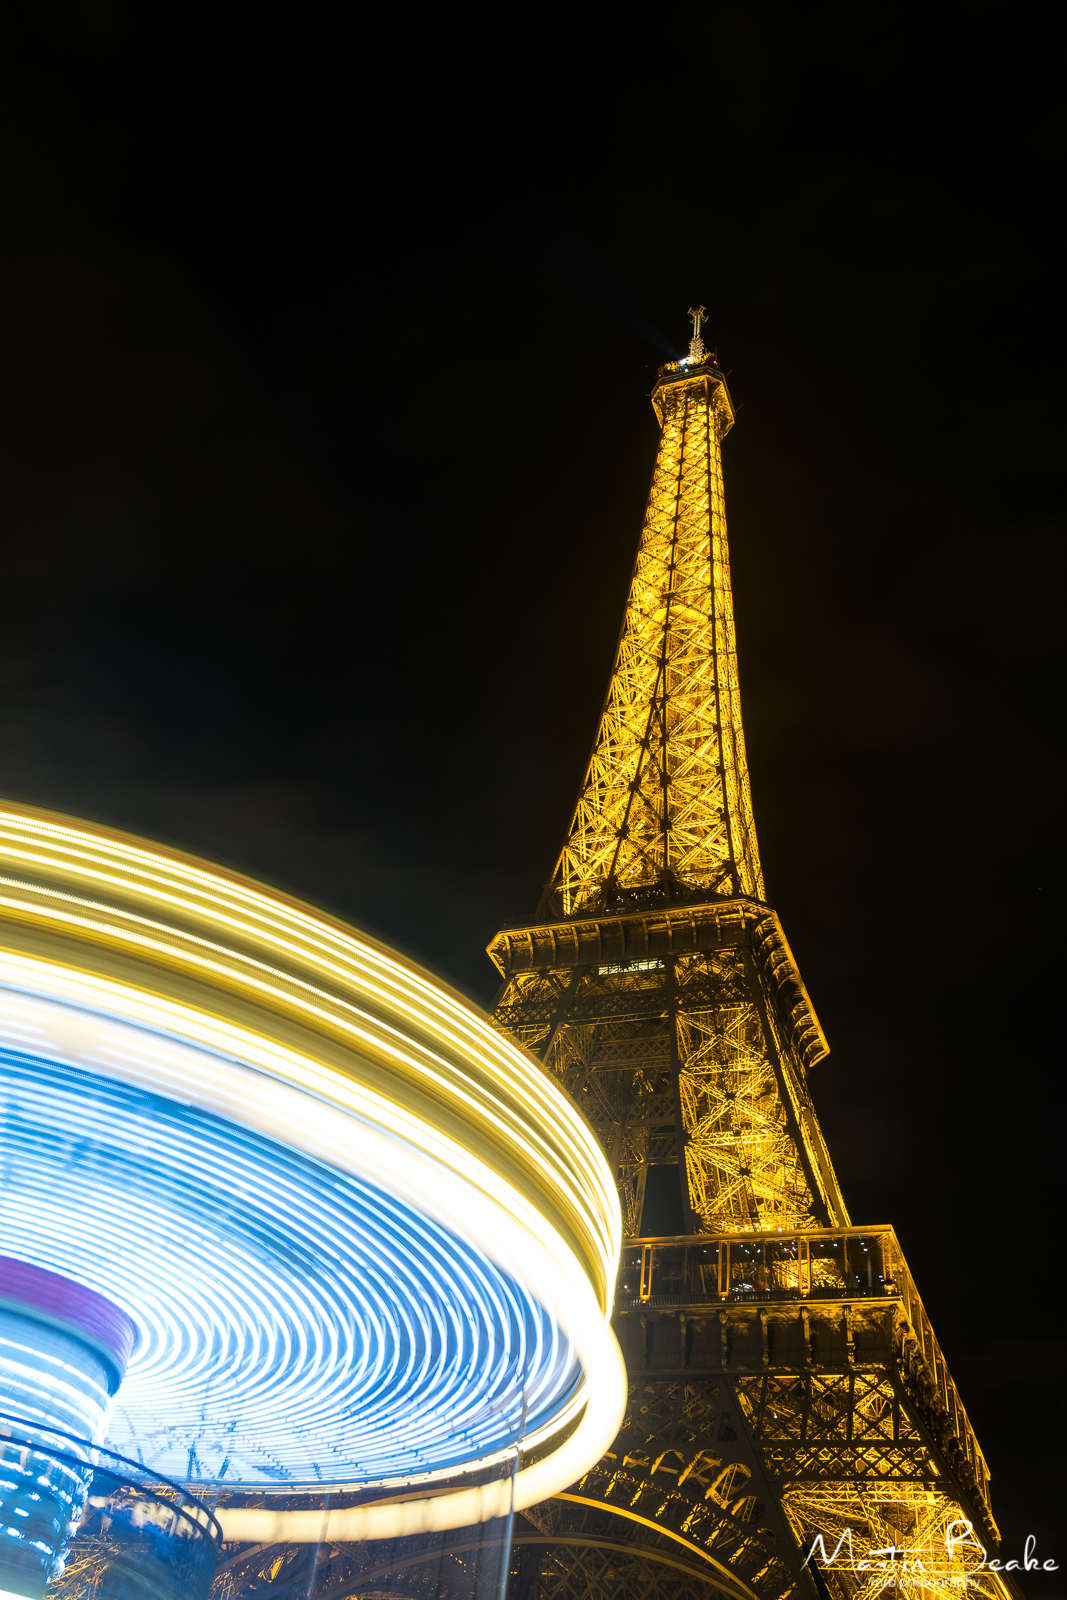 Eiffel Tower and Carousel at Night